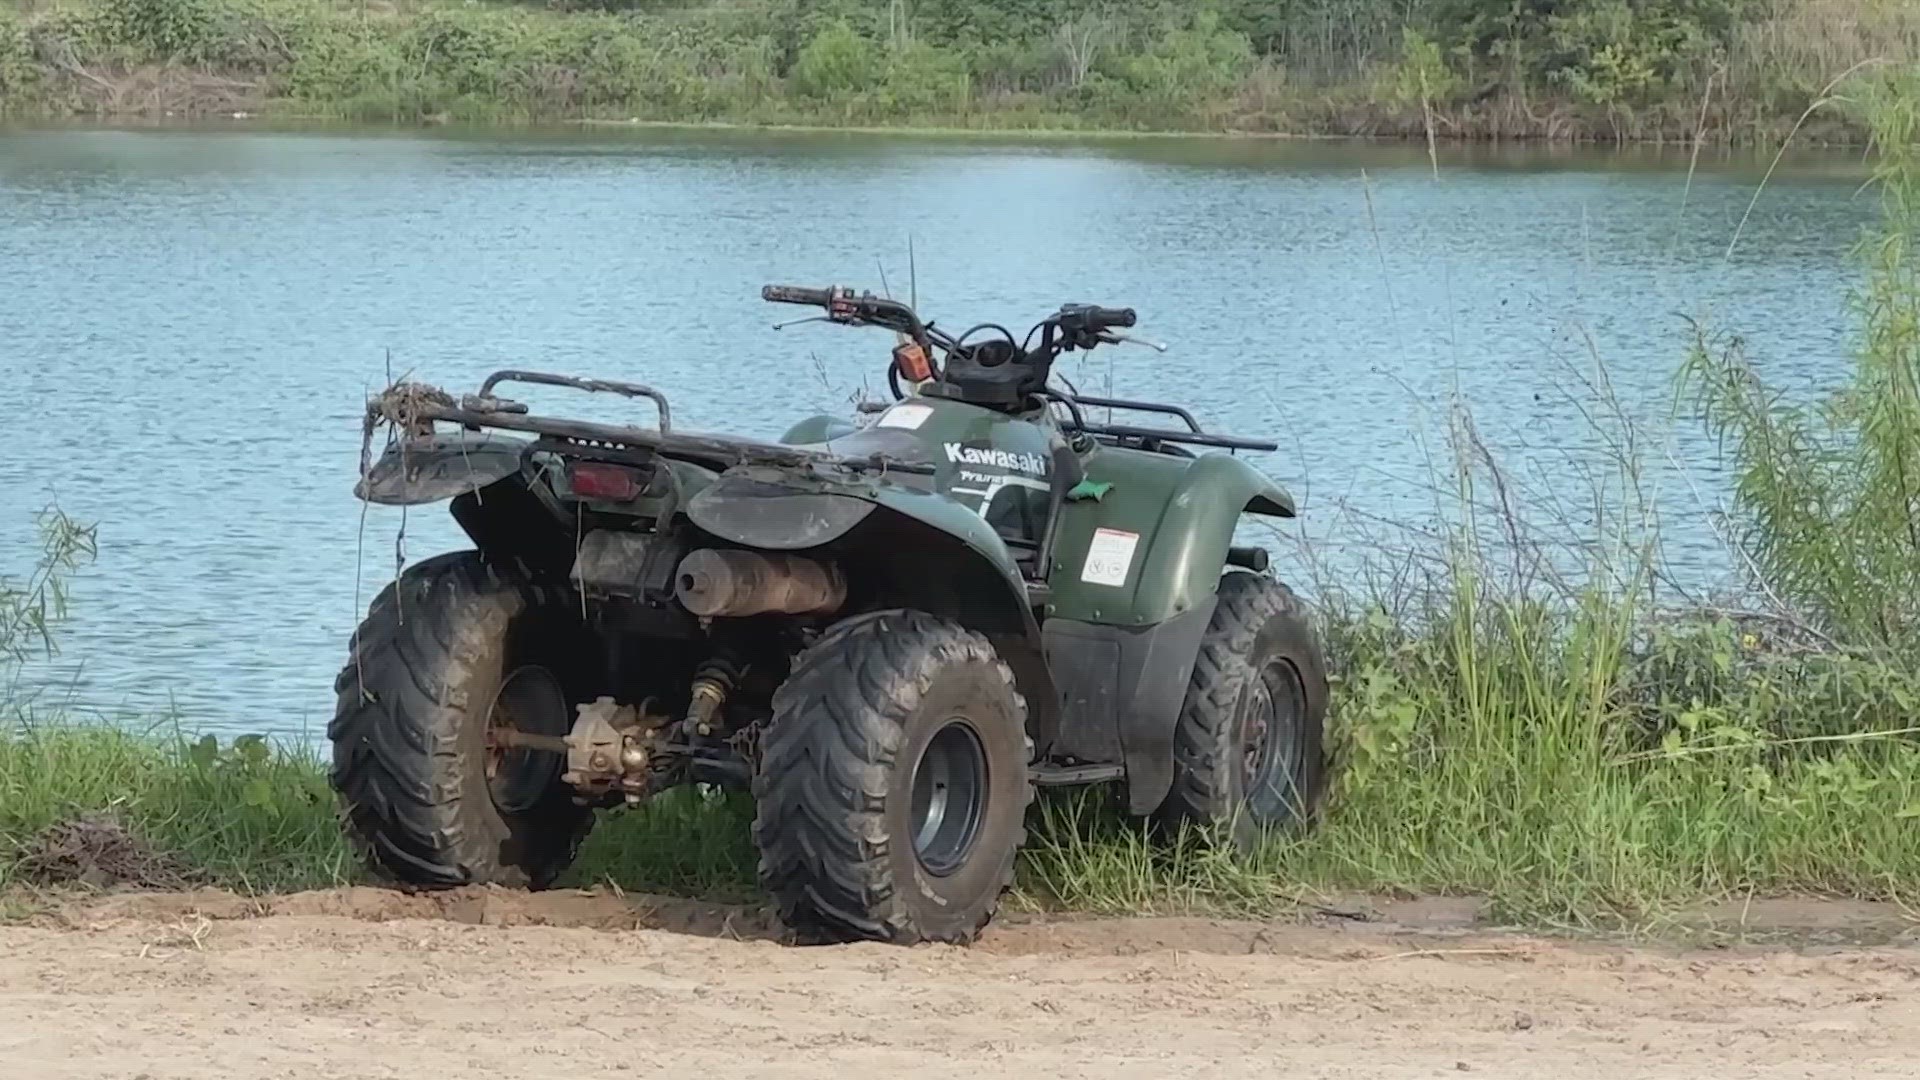 The body of a man who crashed an ATV at an off-road park in Crosby was recovered after a brief search on Memorial Day, according to Sheriff Ed Gonzalez.